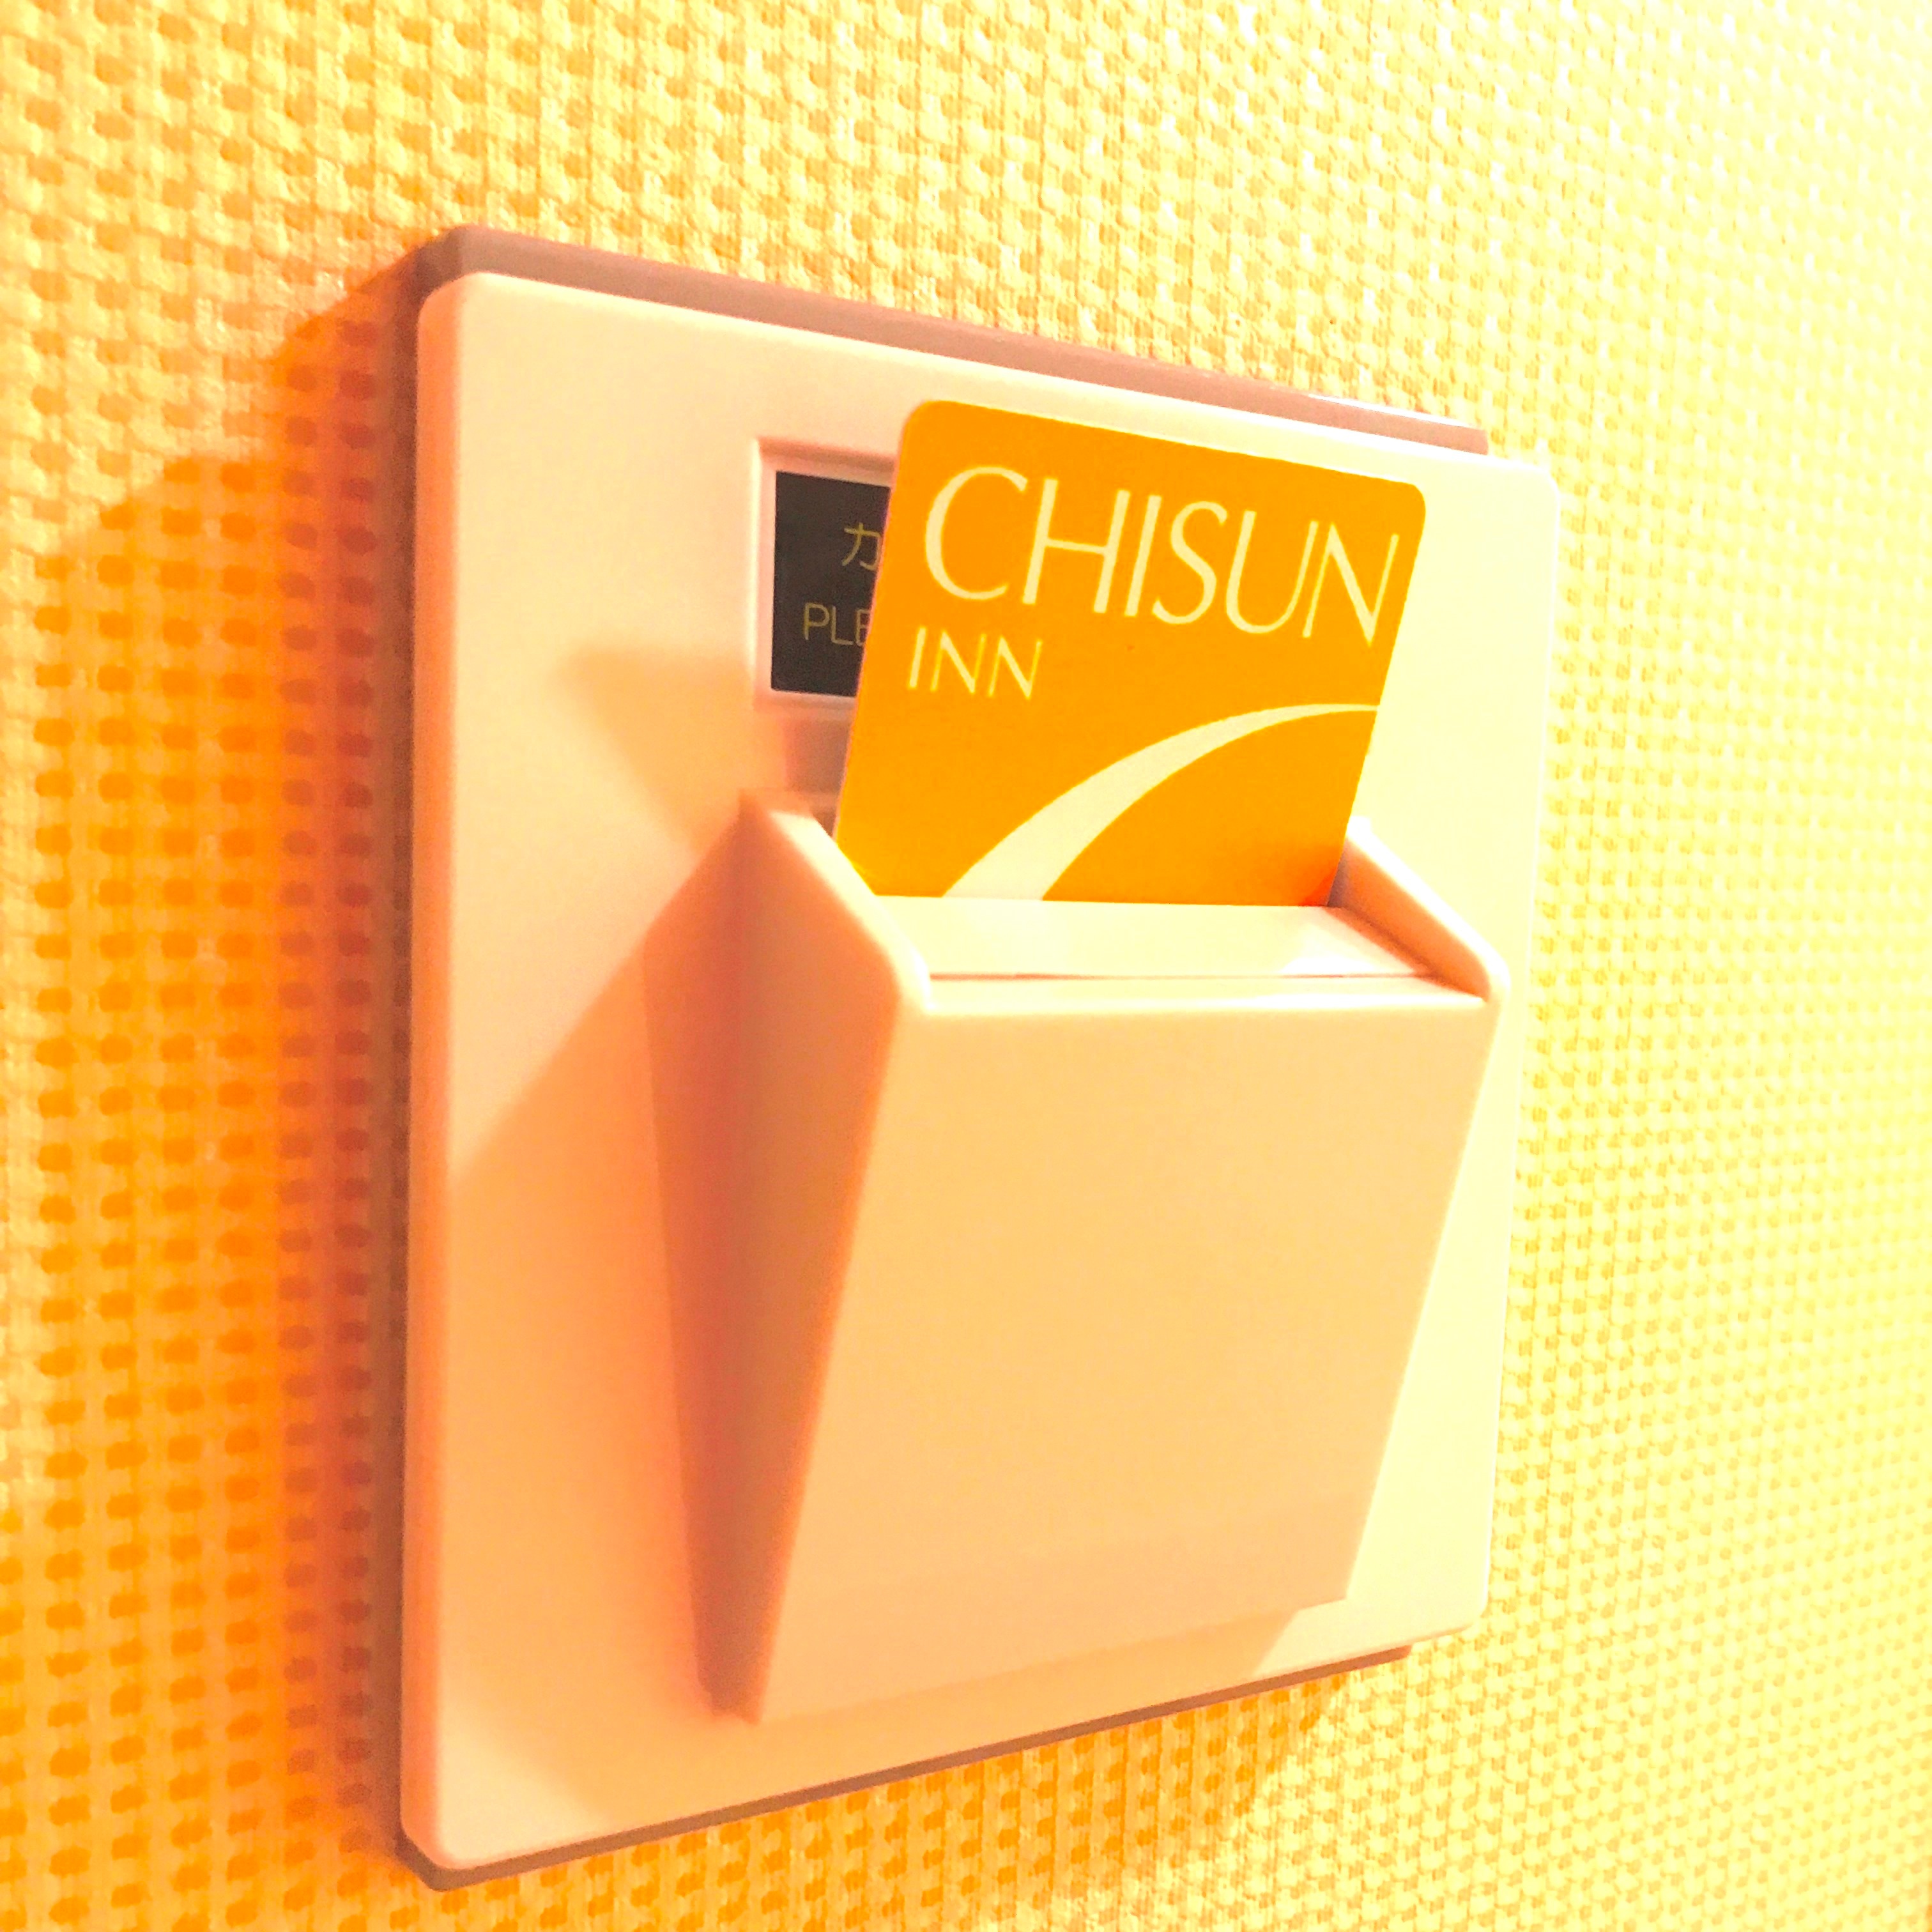 ◆ Room electricity ◆ When you insert the room card key into the card holder, electricity will be activated.